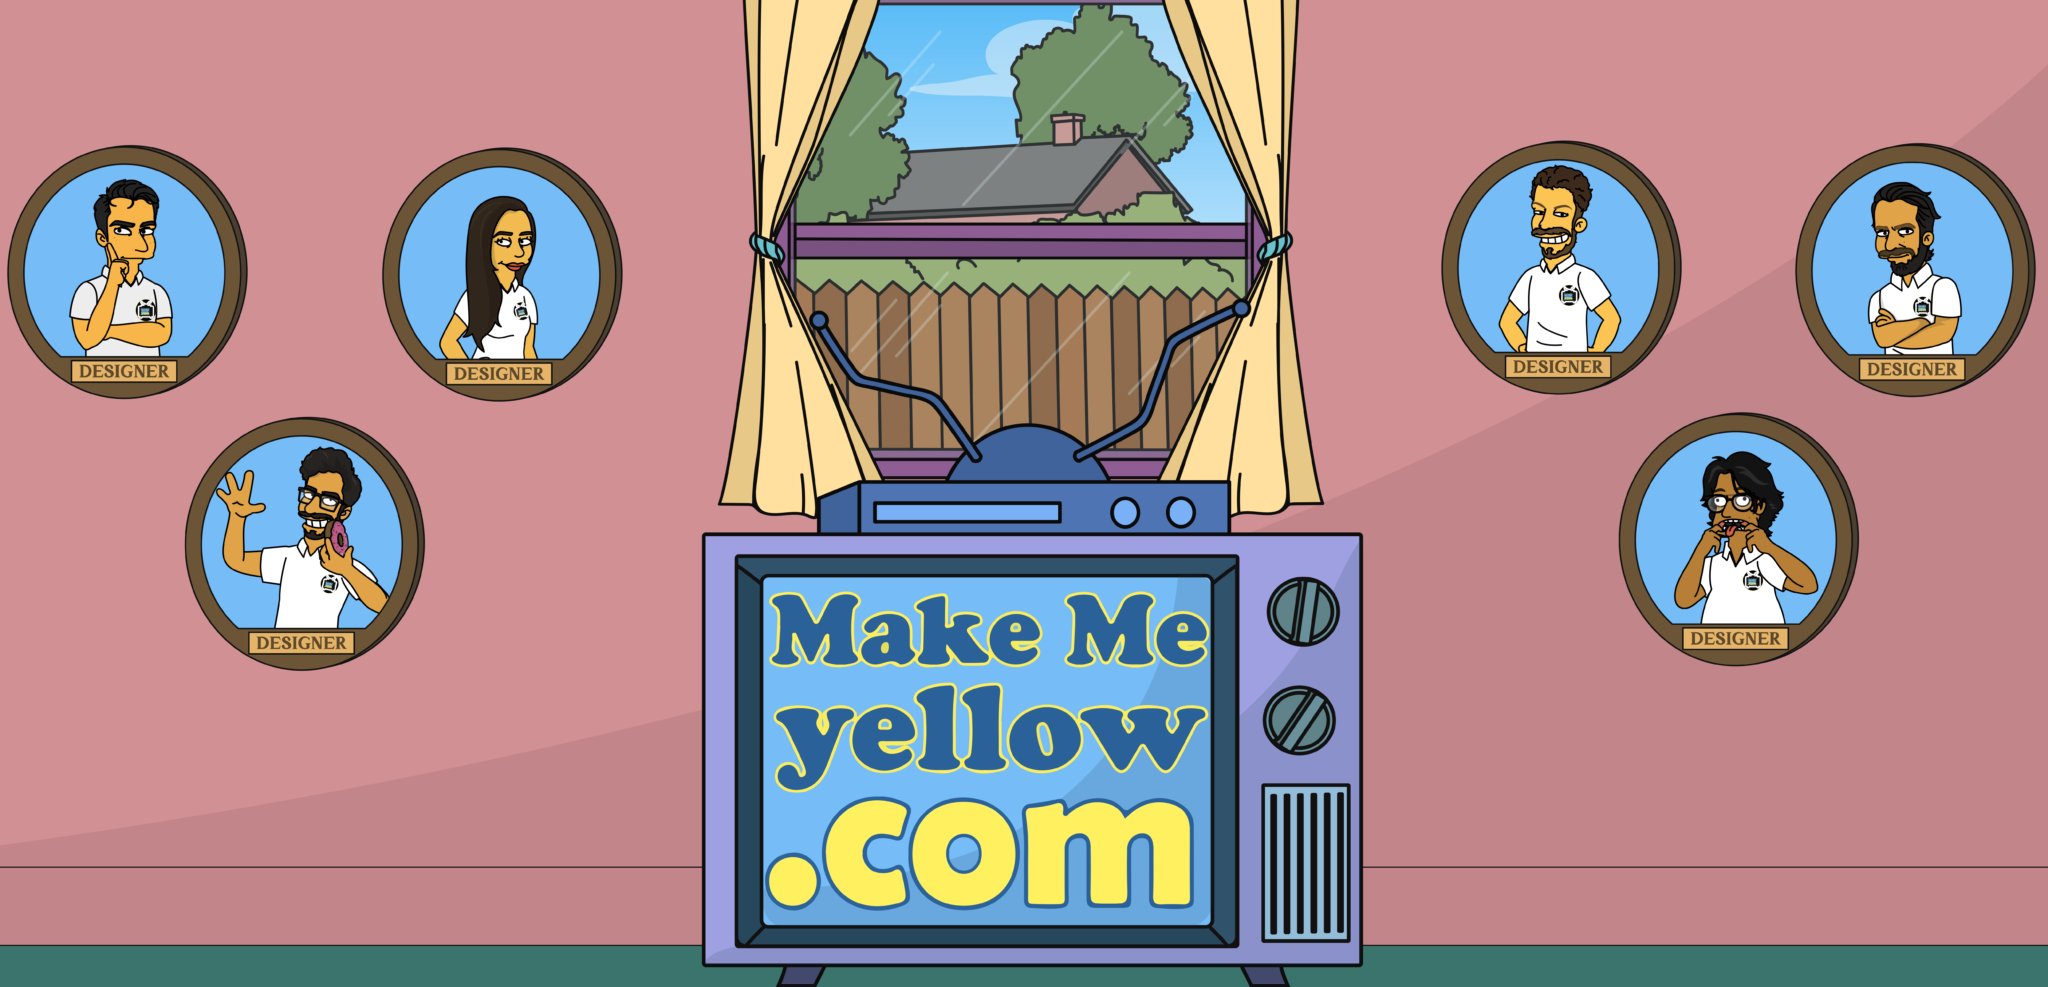 BEST Simpsons Avatar Service in 2023 ⭐️ Make Me Yellow